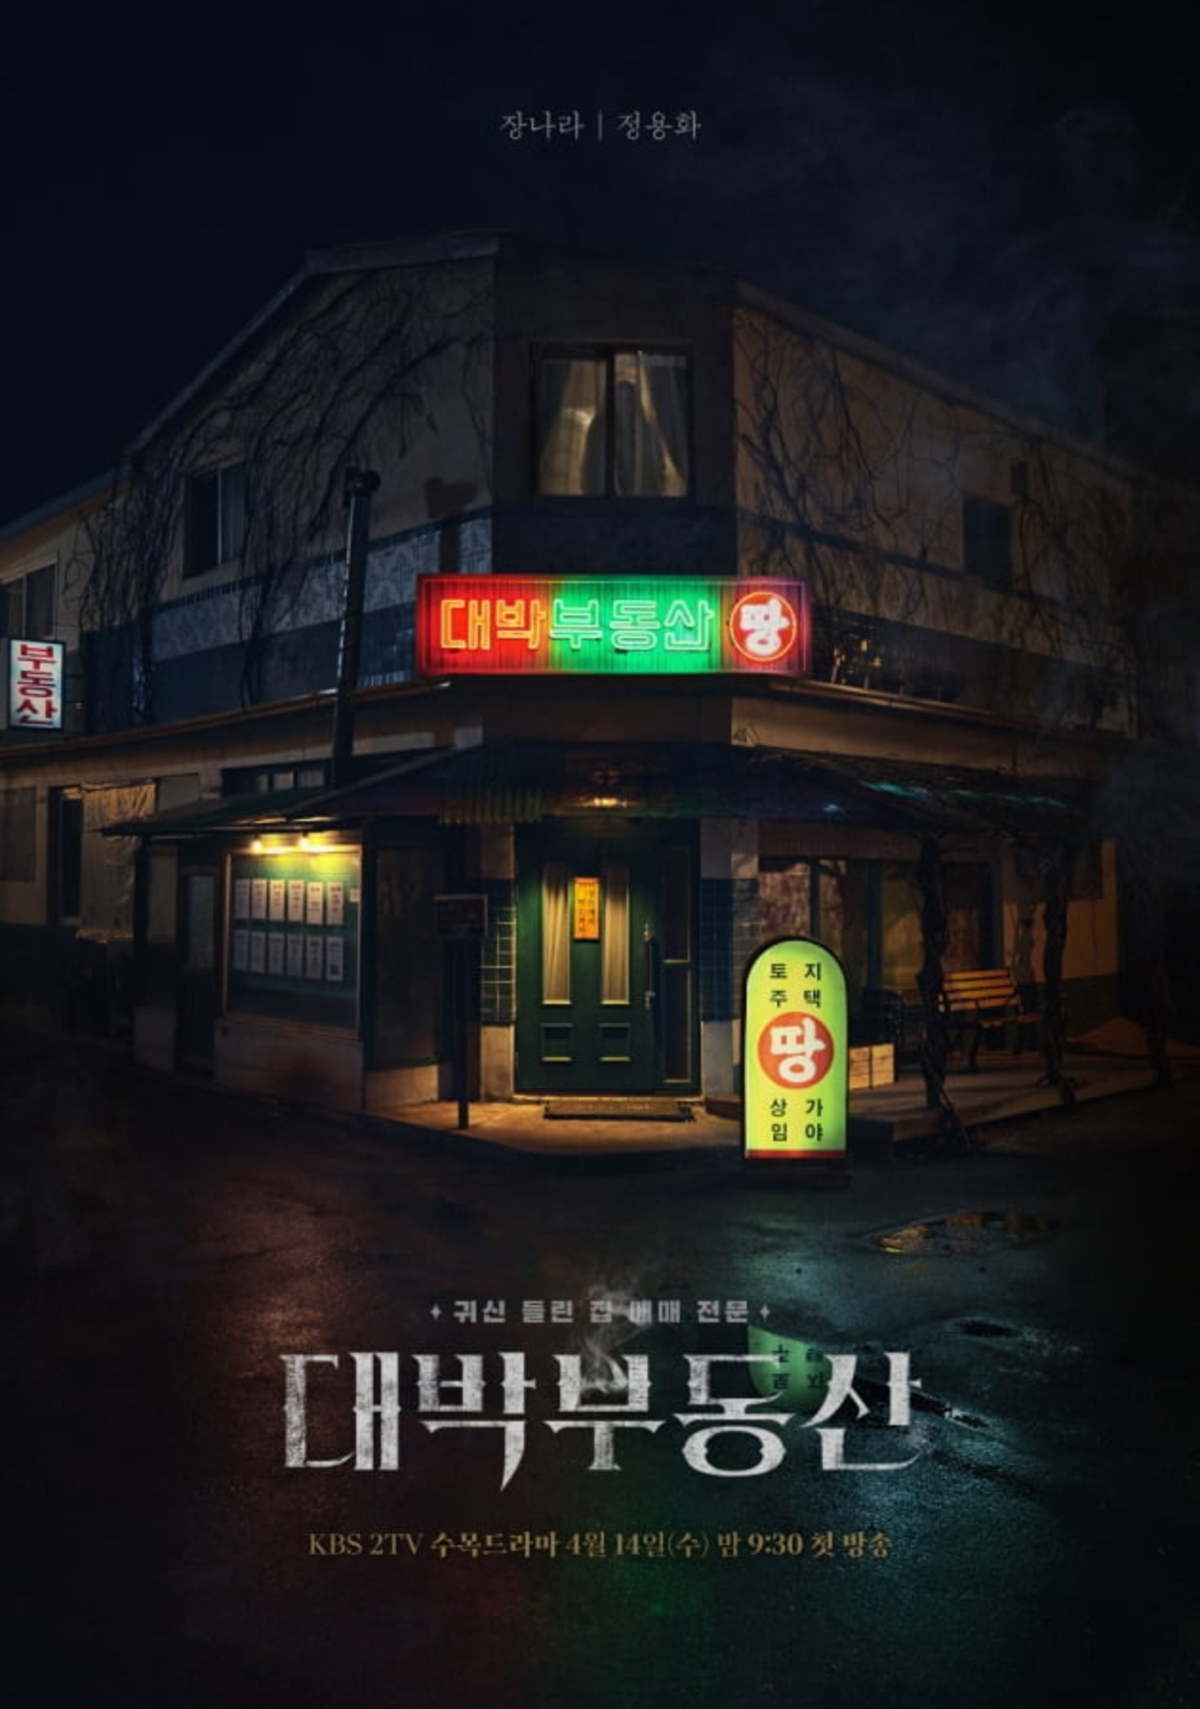 kbs-drama-sell-your-haunted-house-releases-new-poster-starring-jang-na-ra-jung-yong-hwa